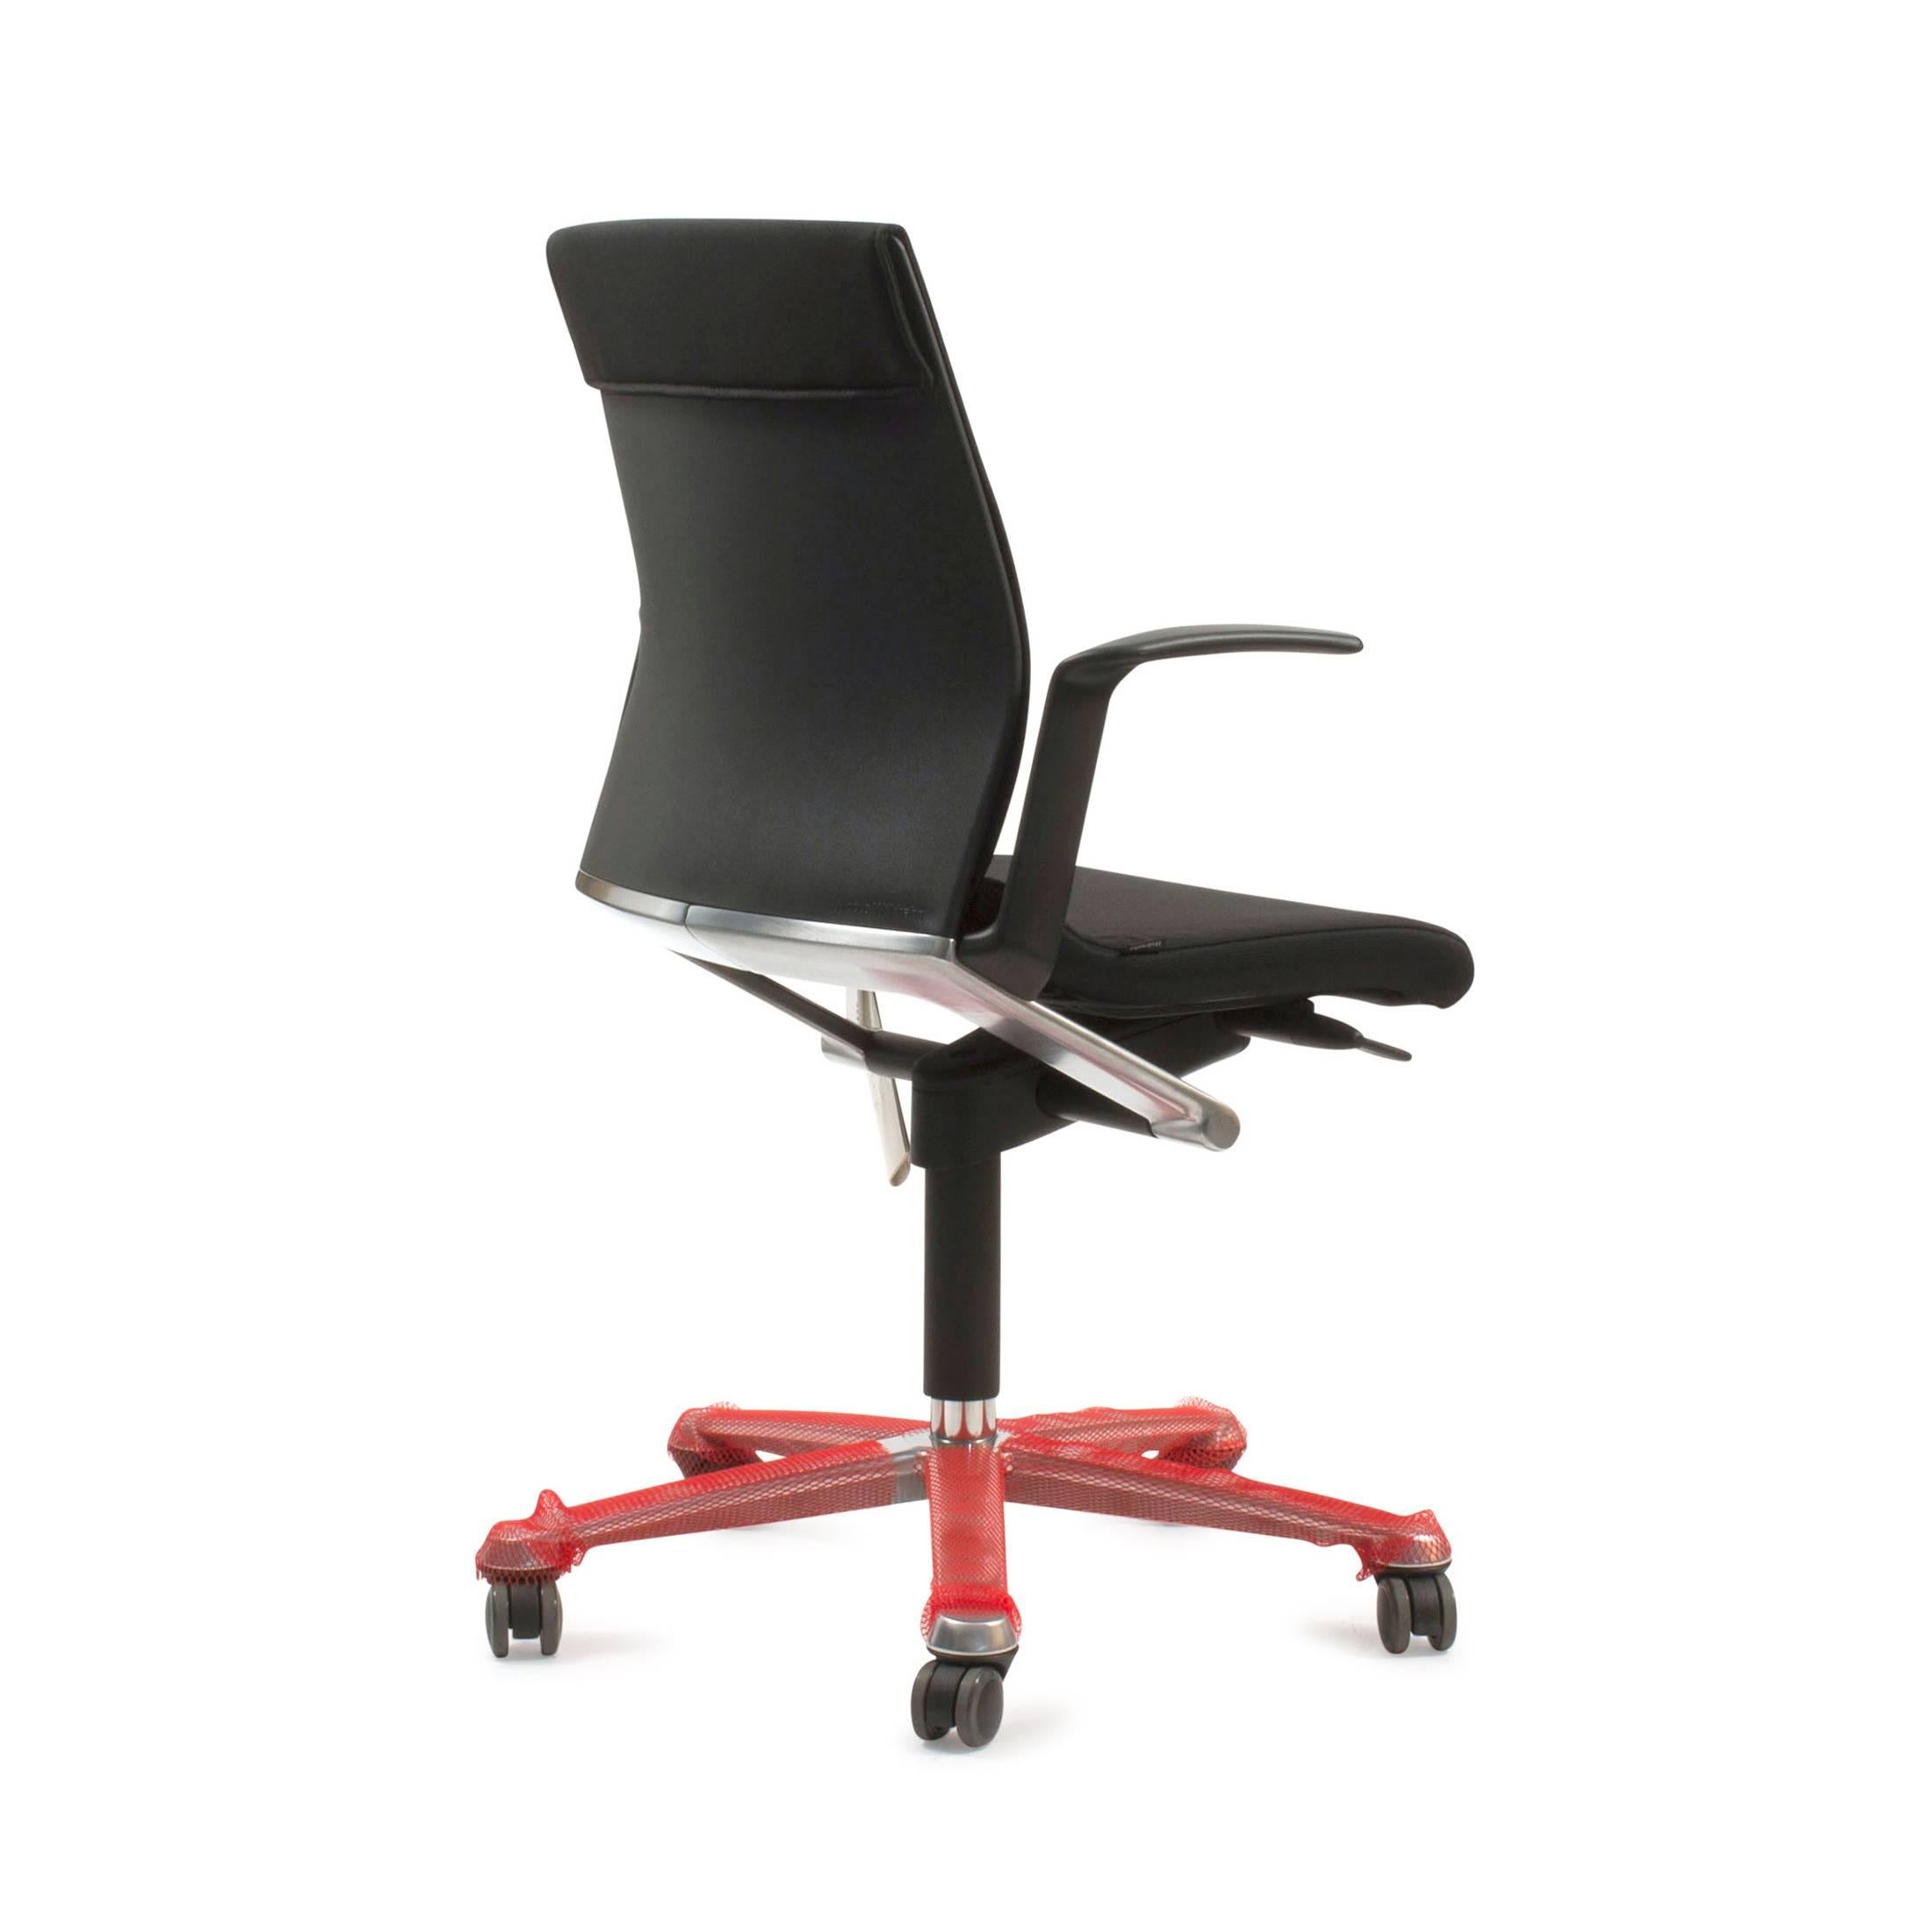 Black Modus 263/7 Adjustable Swivel Office Task Chair for Wilkhahn, Germany In Excellent Condition For Sale In Brooklyn, NY